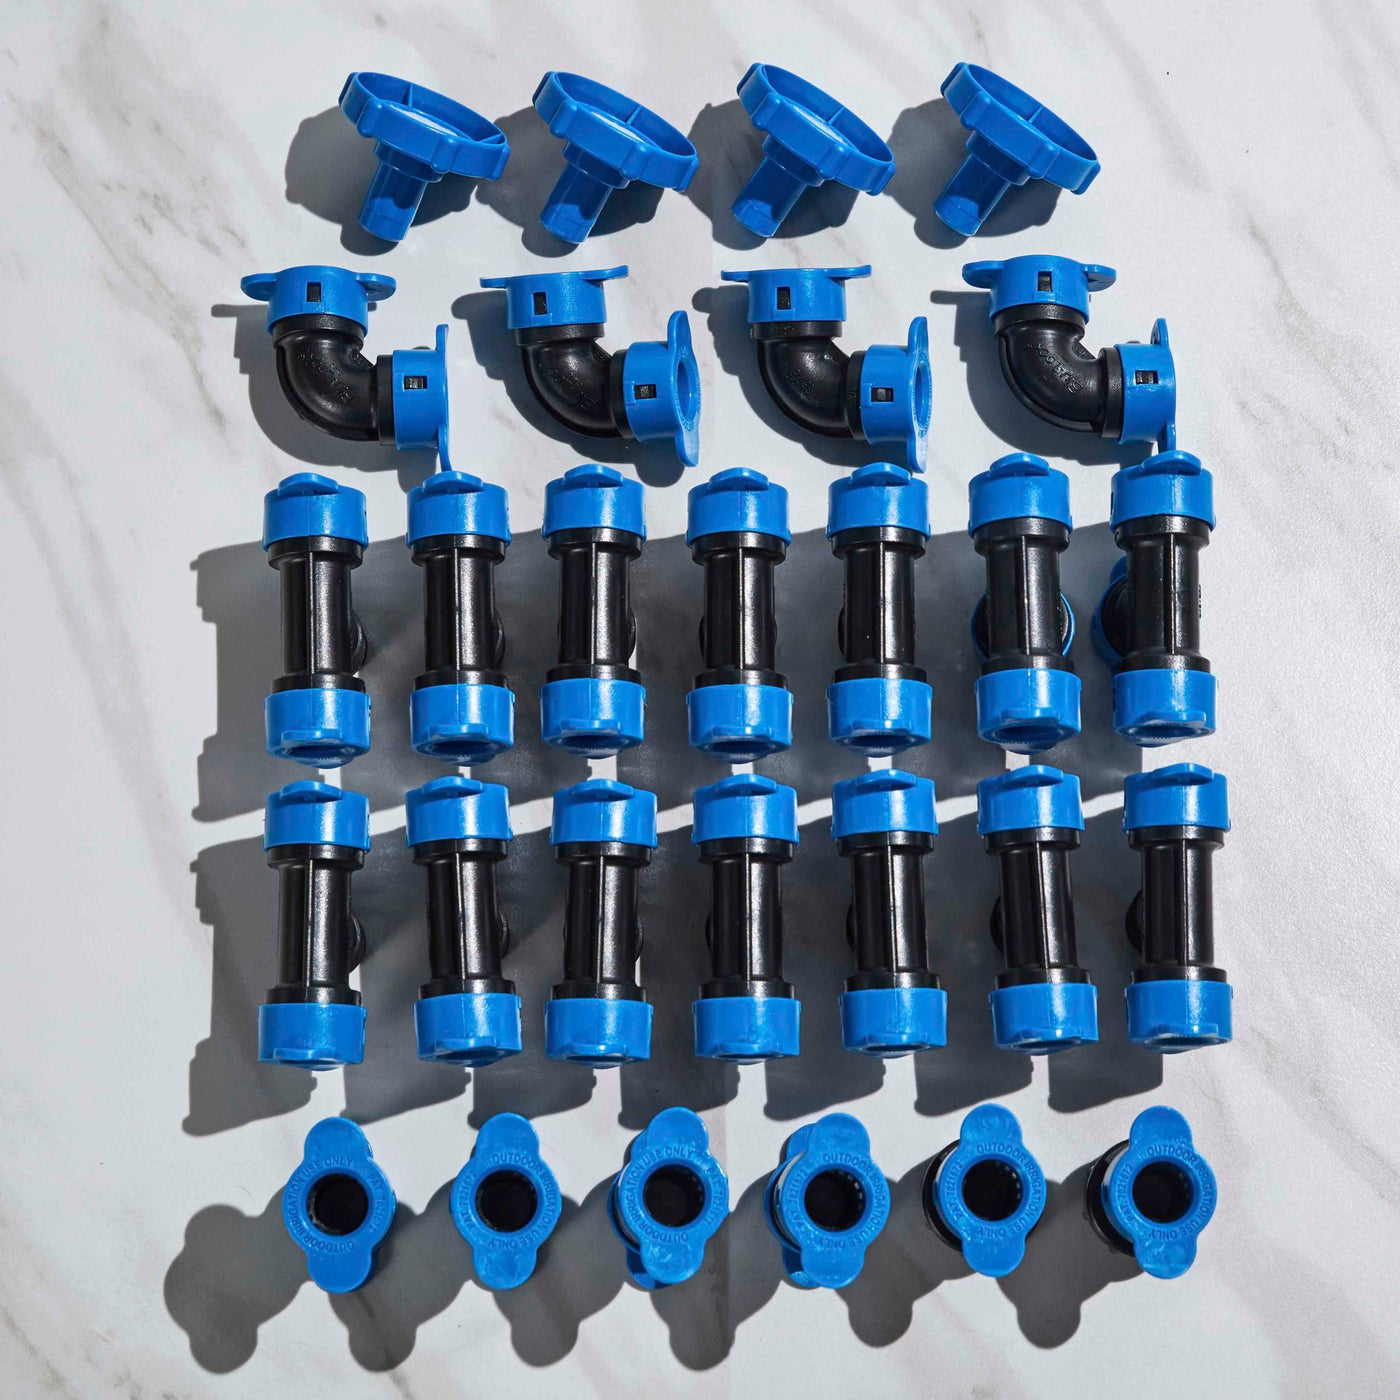 Blu-Lock push fittings. Four drain valves, four elbows, fourteen tees, four couplings and two hose faucet adapters.  